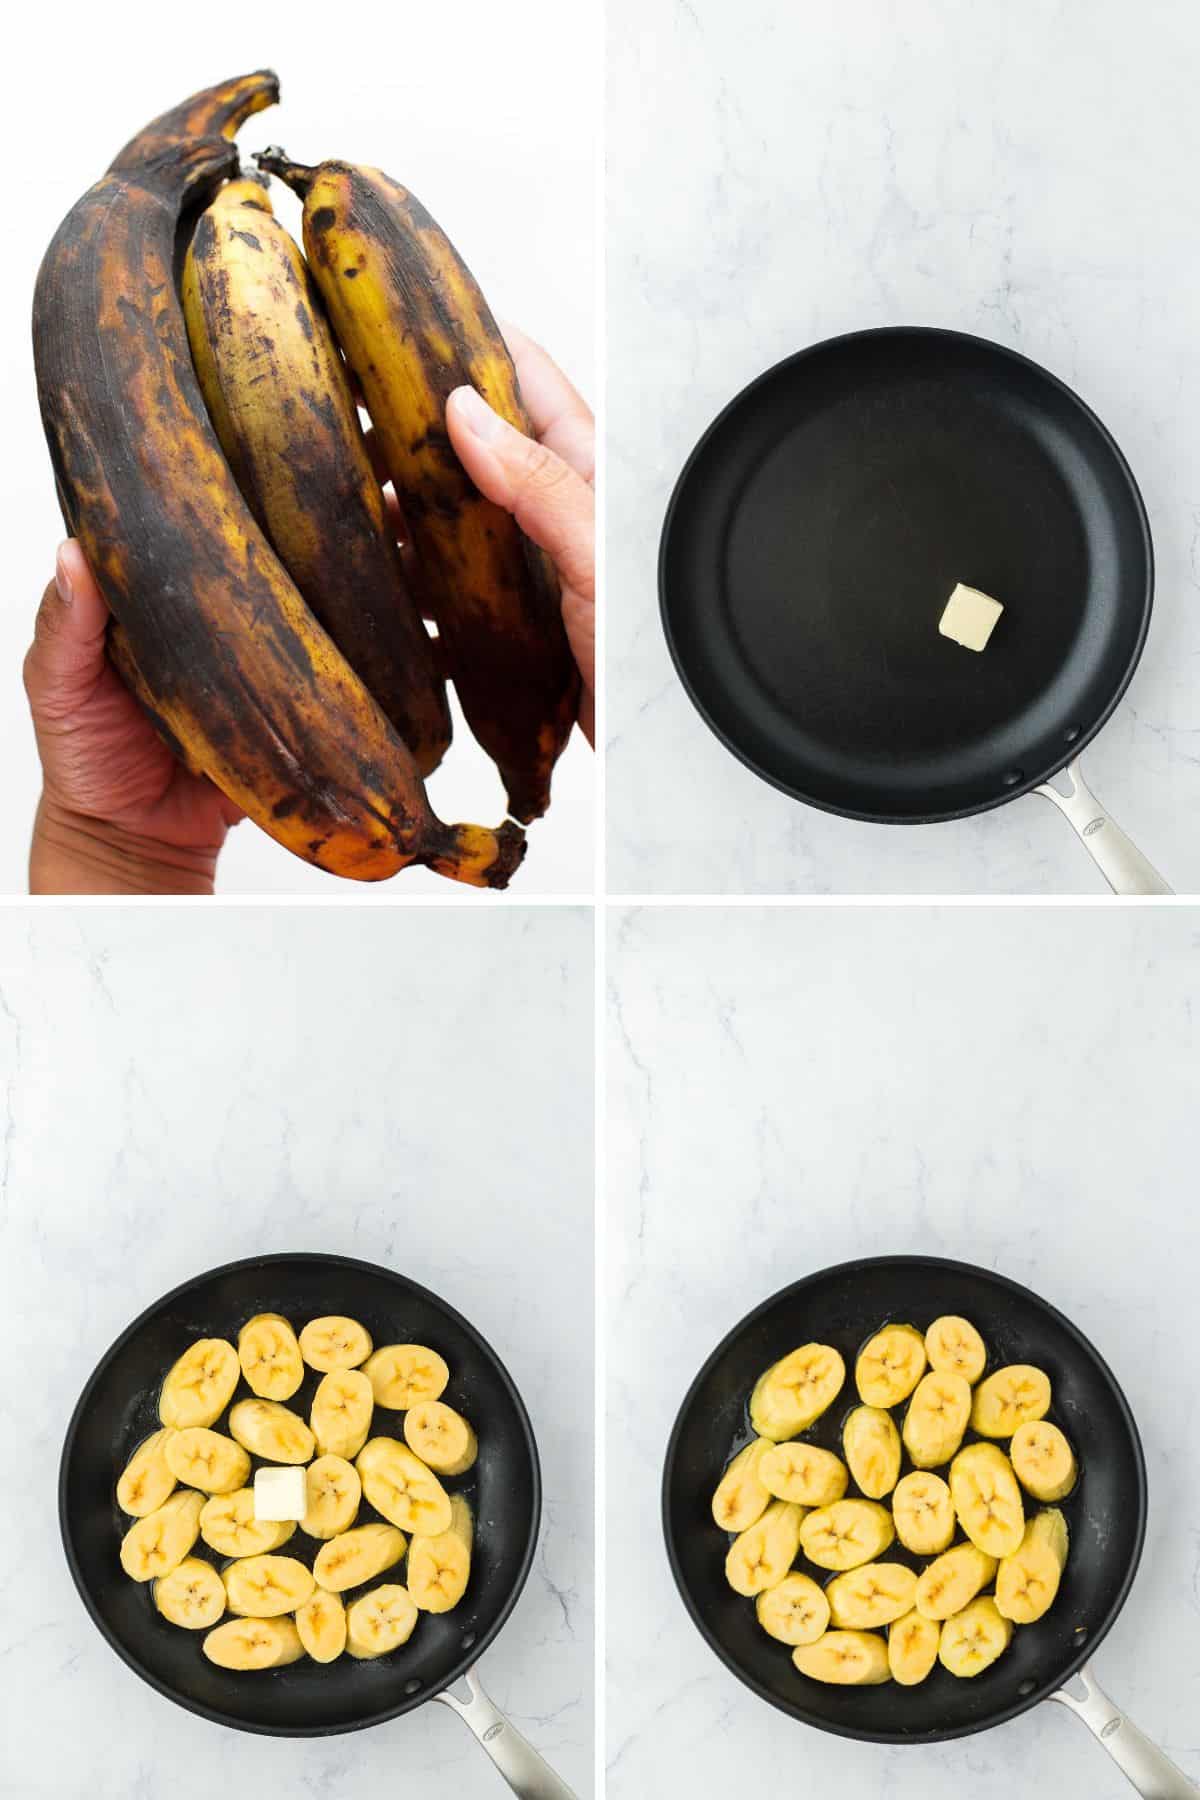 A collage of black plantains that are super ripe and a black skillet frying them sliced in butter